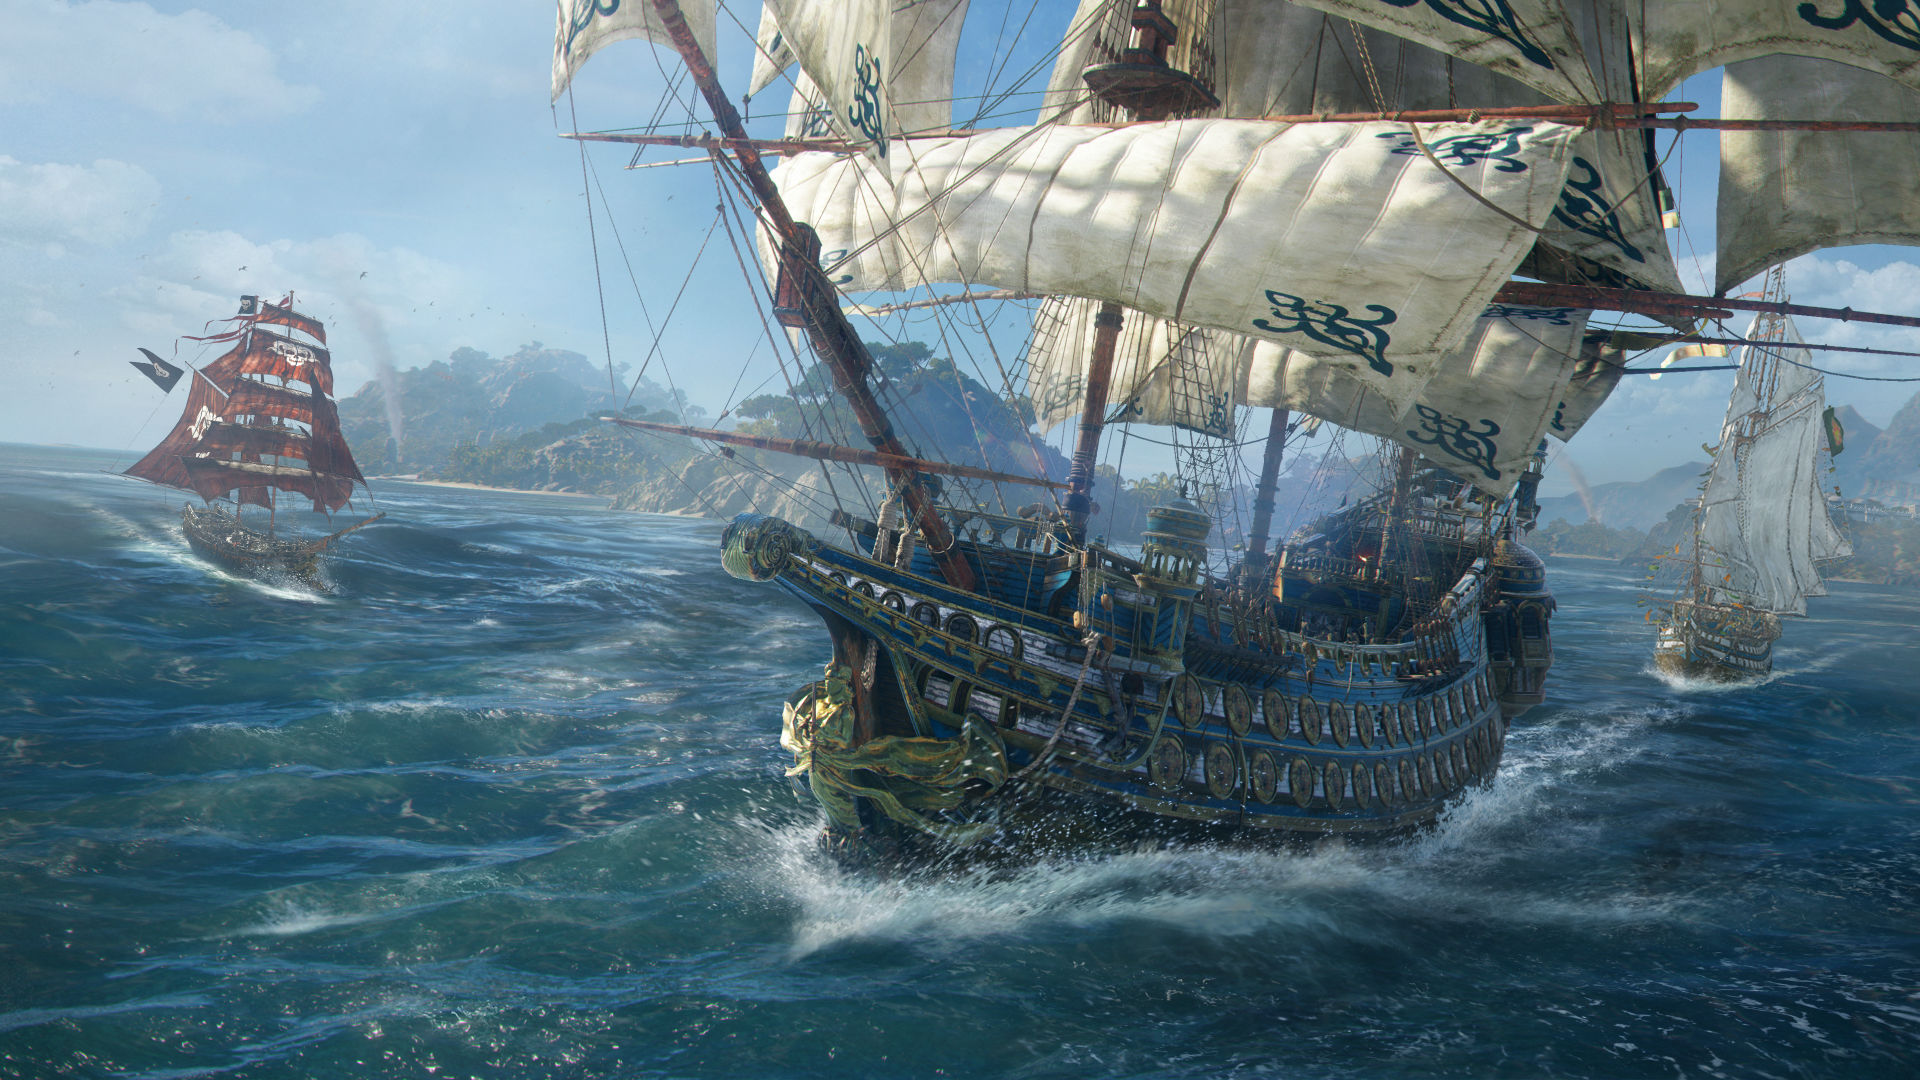 Skull and Bones Gameplay Reveal Comes Ahead of Next Ubisoft Forward